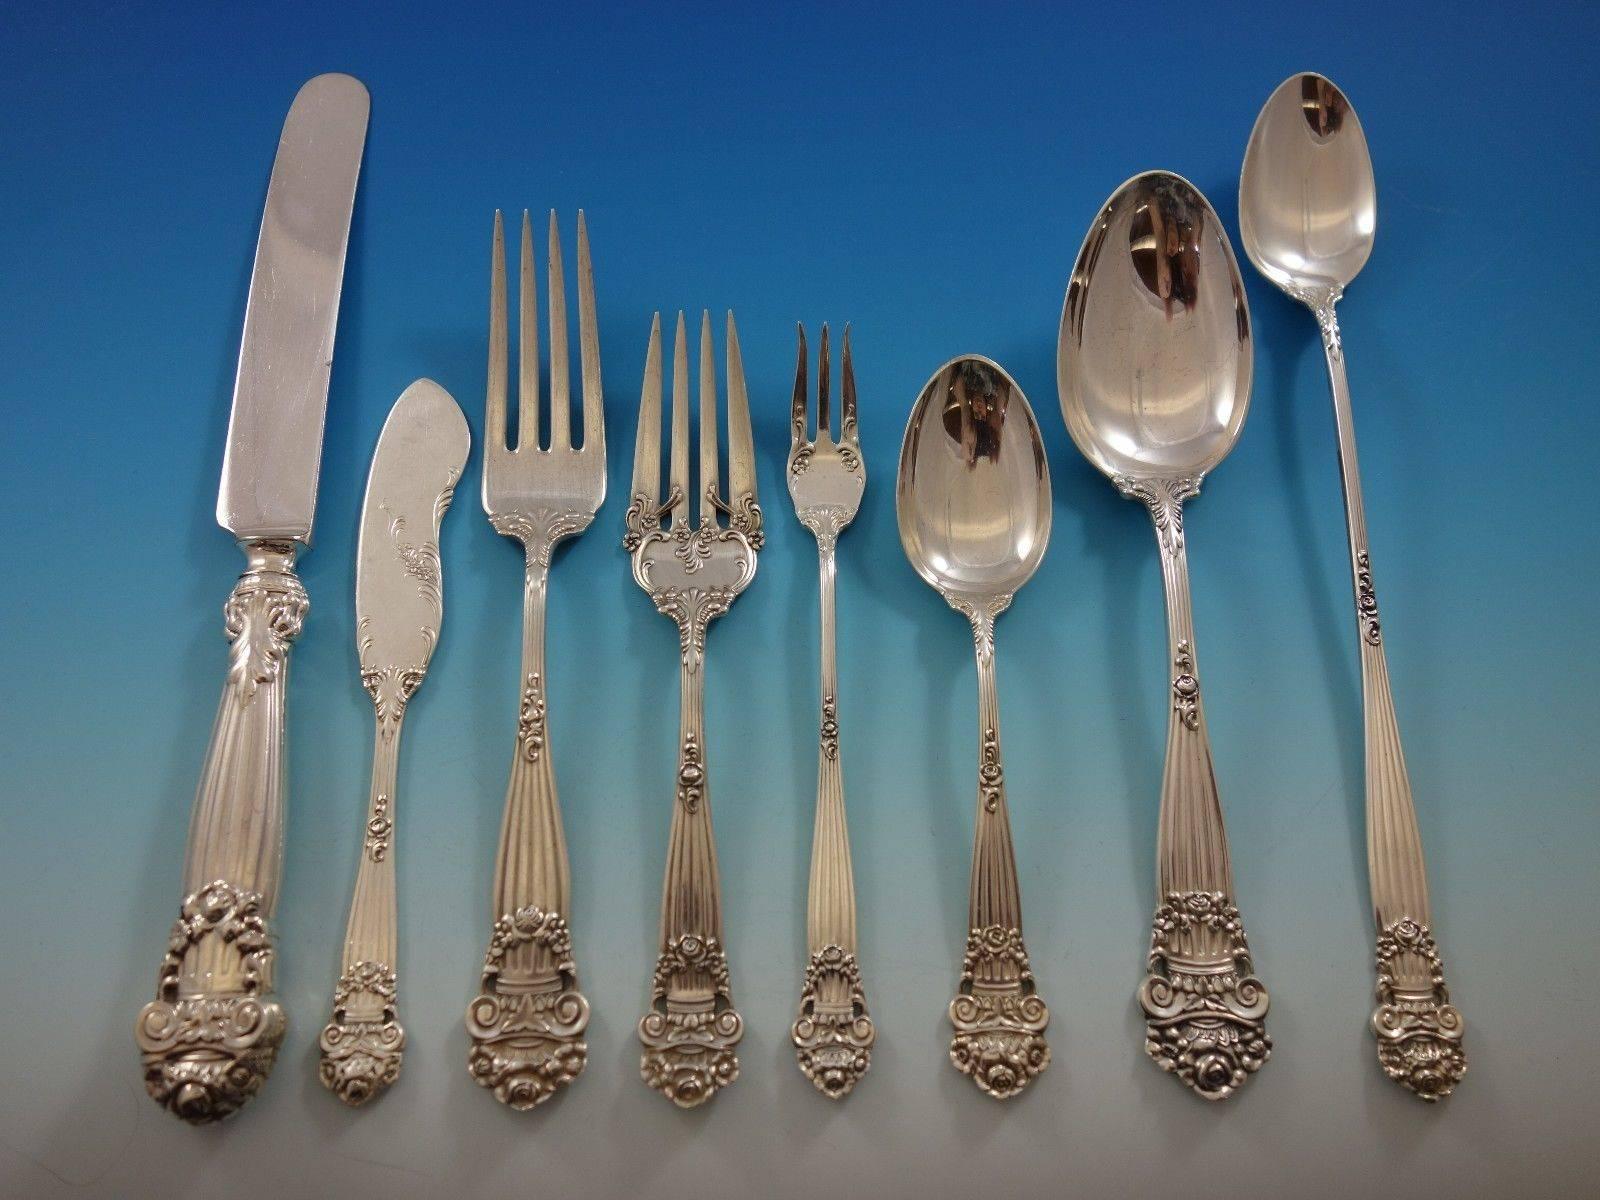 Georgian by Towle sterling silver flatware set of 75 pieces. This set includes: 

Eight knives, 9